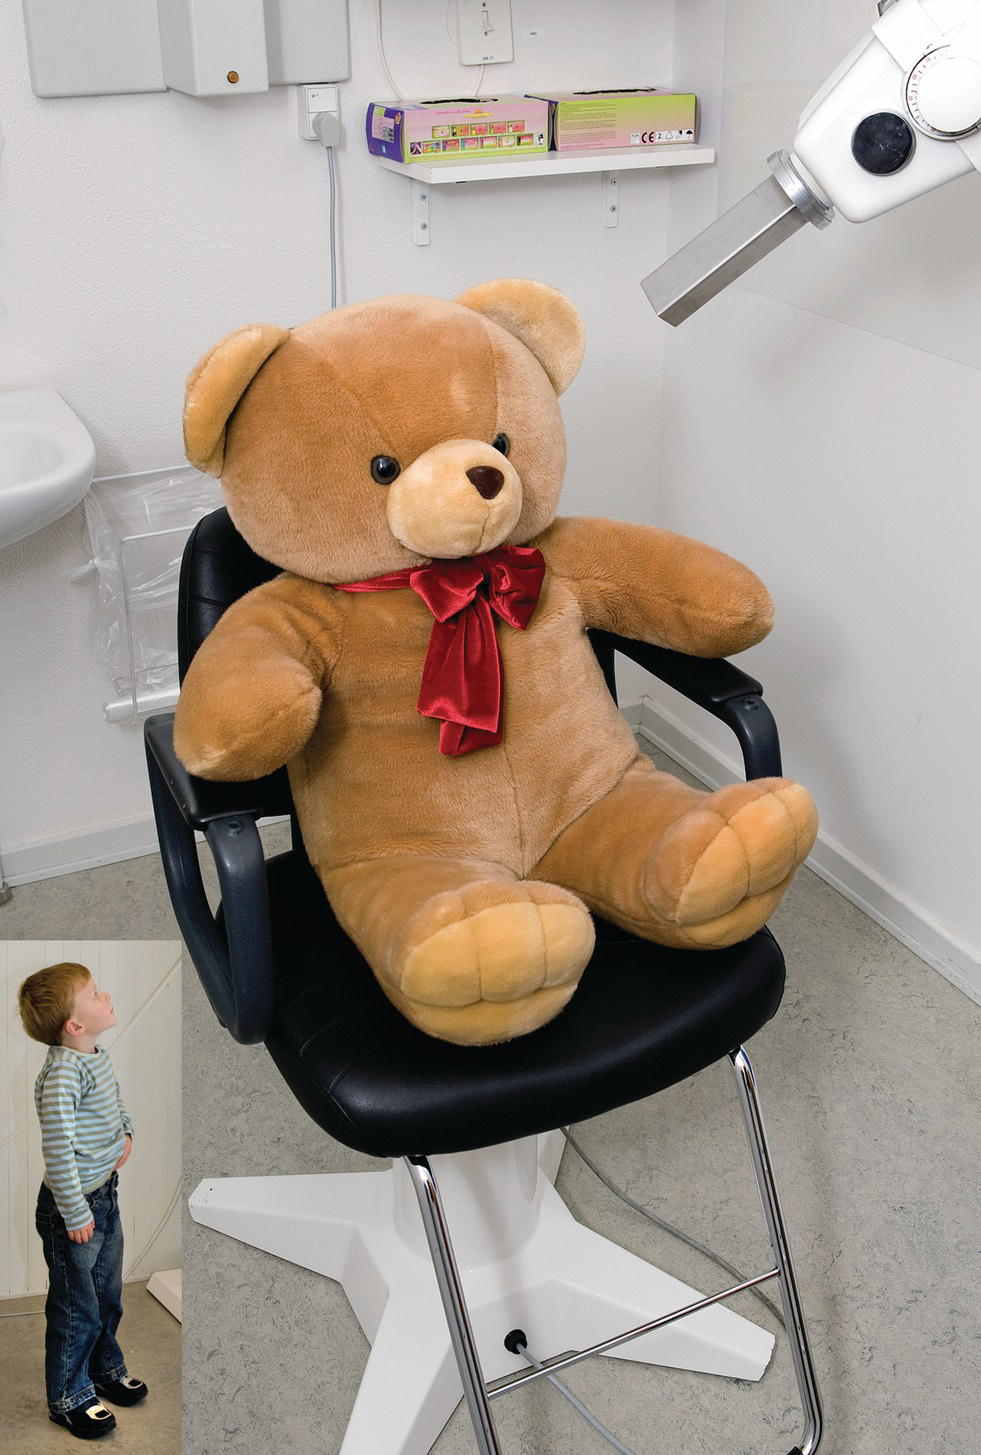 Photo displaying a teddy bear place on a chair, facing the head tube of the dental X-ray. Inset: Photo of a child looking up.